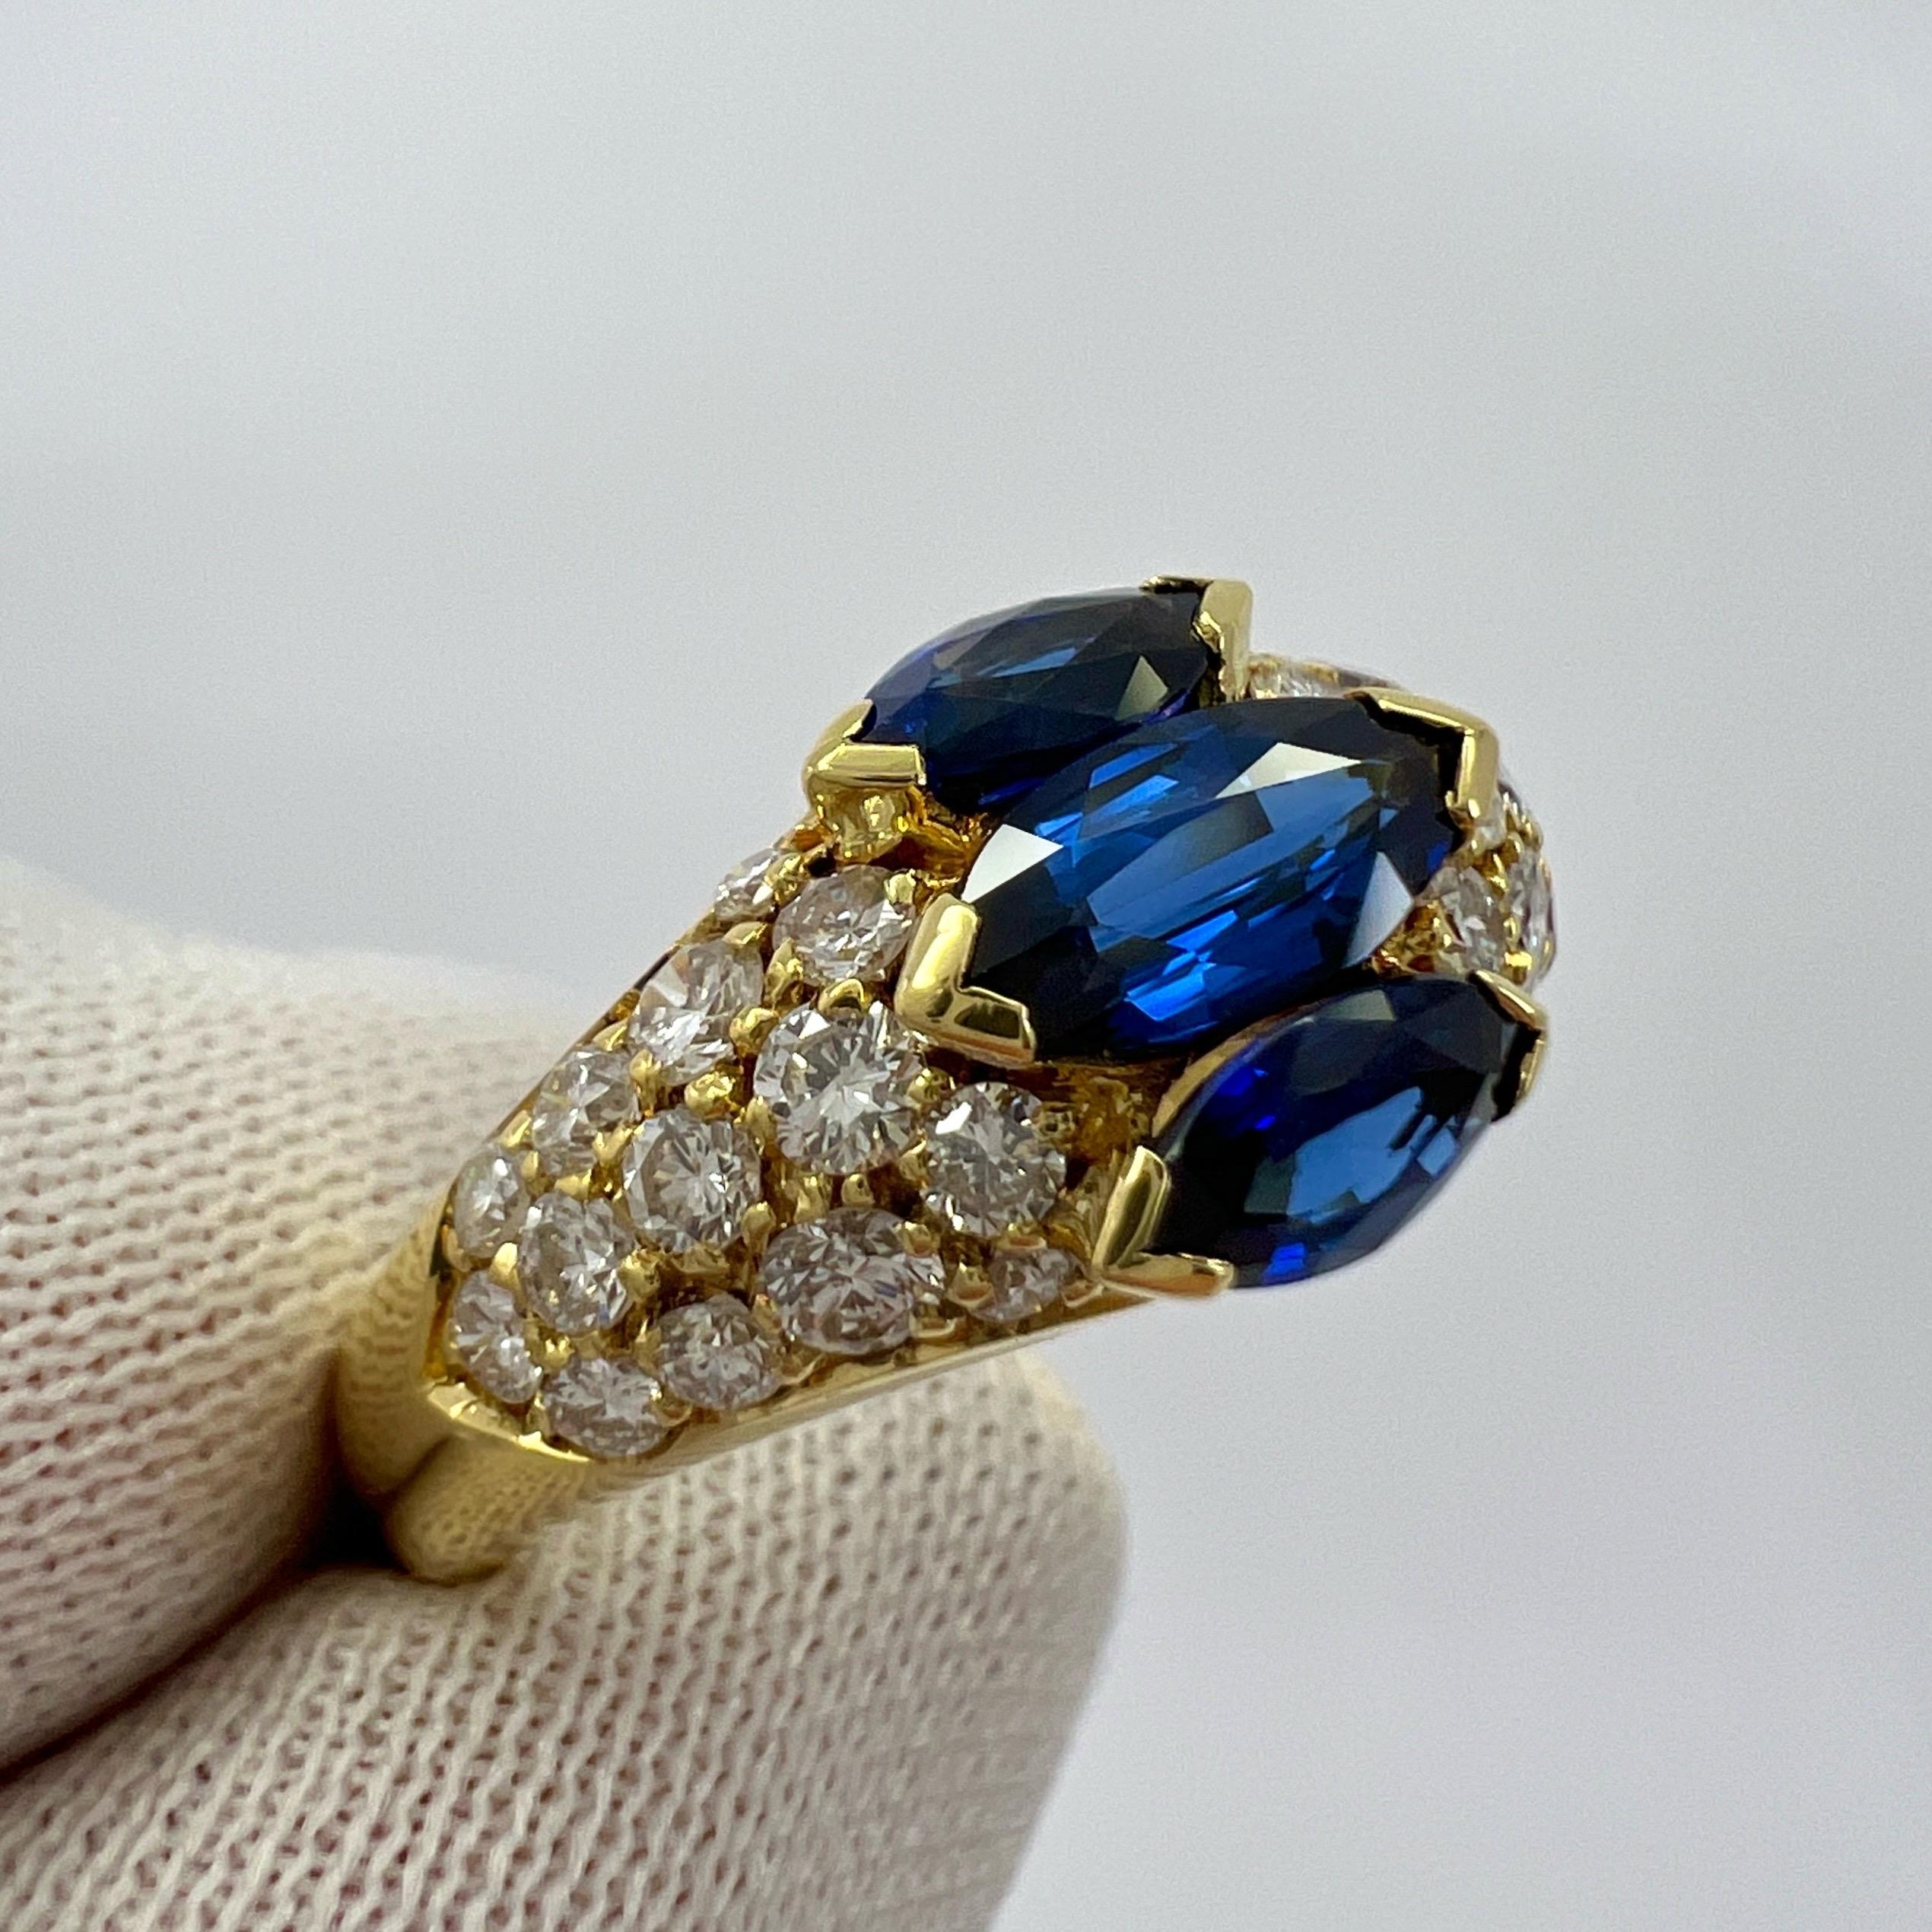 Rare Vintage Van Cleef & Arpels Marquise Blue Sapphire And Diamond Cocktail Ring For Sale 1